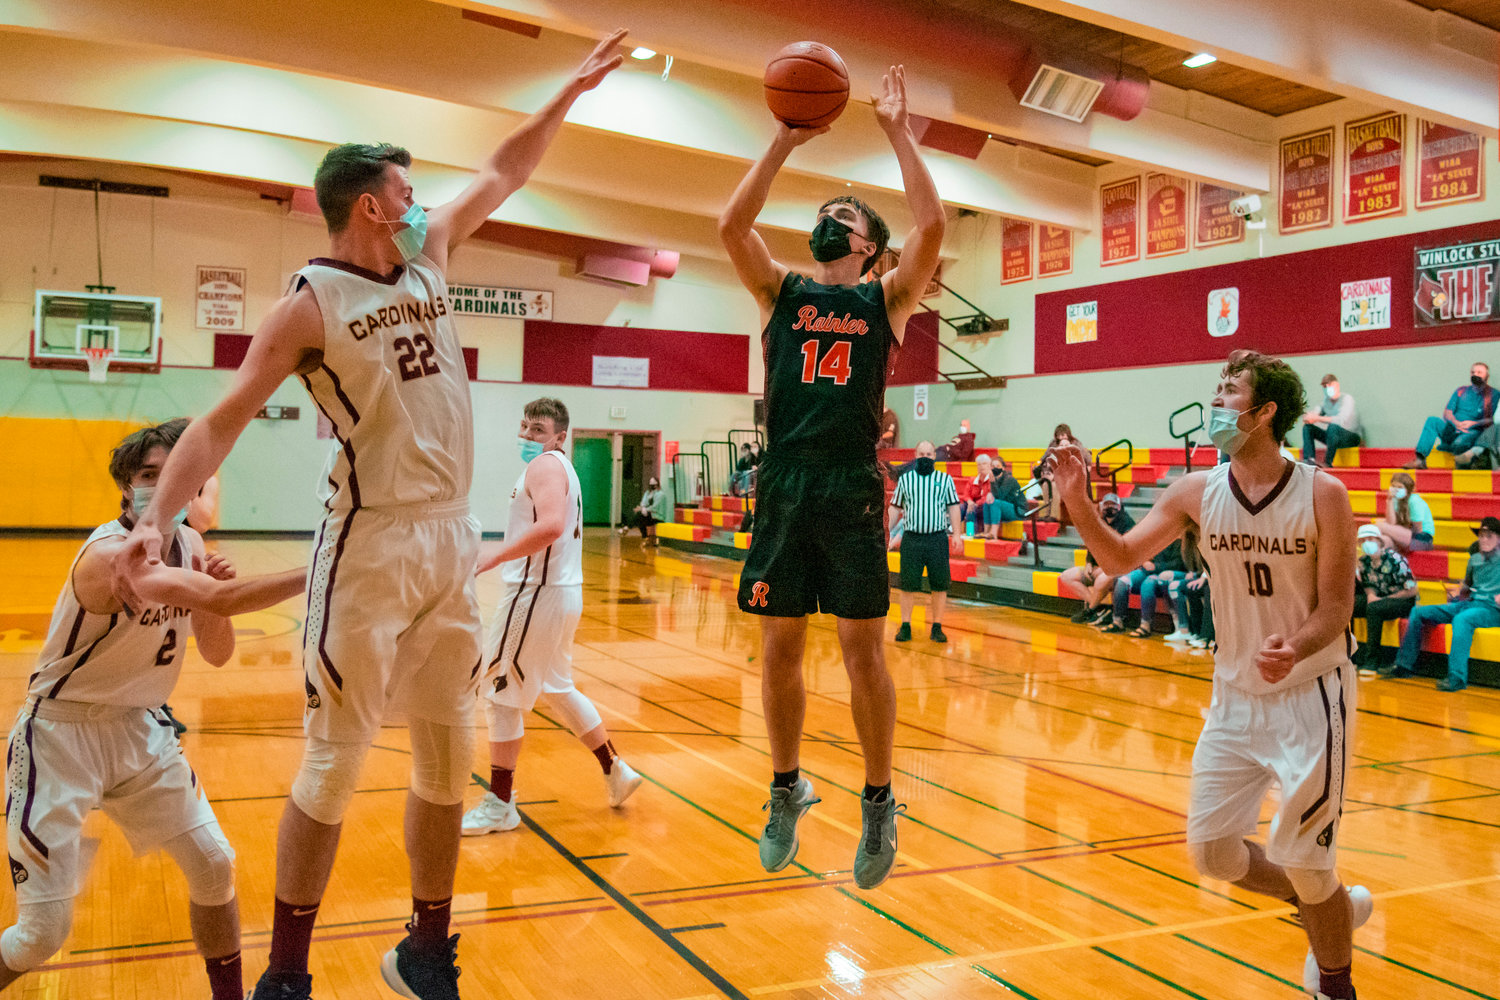 Rainier’s Thomas Ronne (14) goes up for a shot during a game against Winlock on Wednesday.